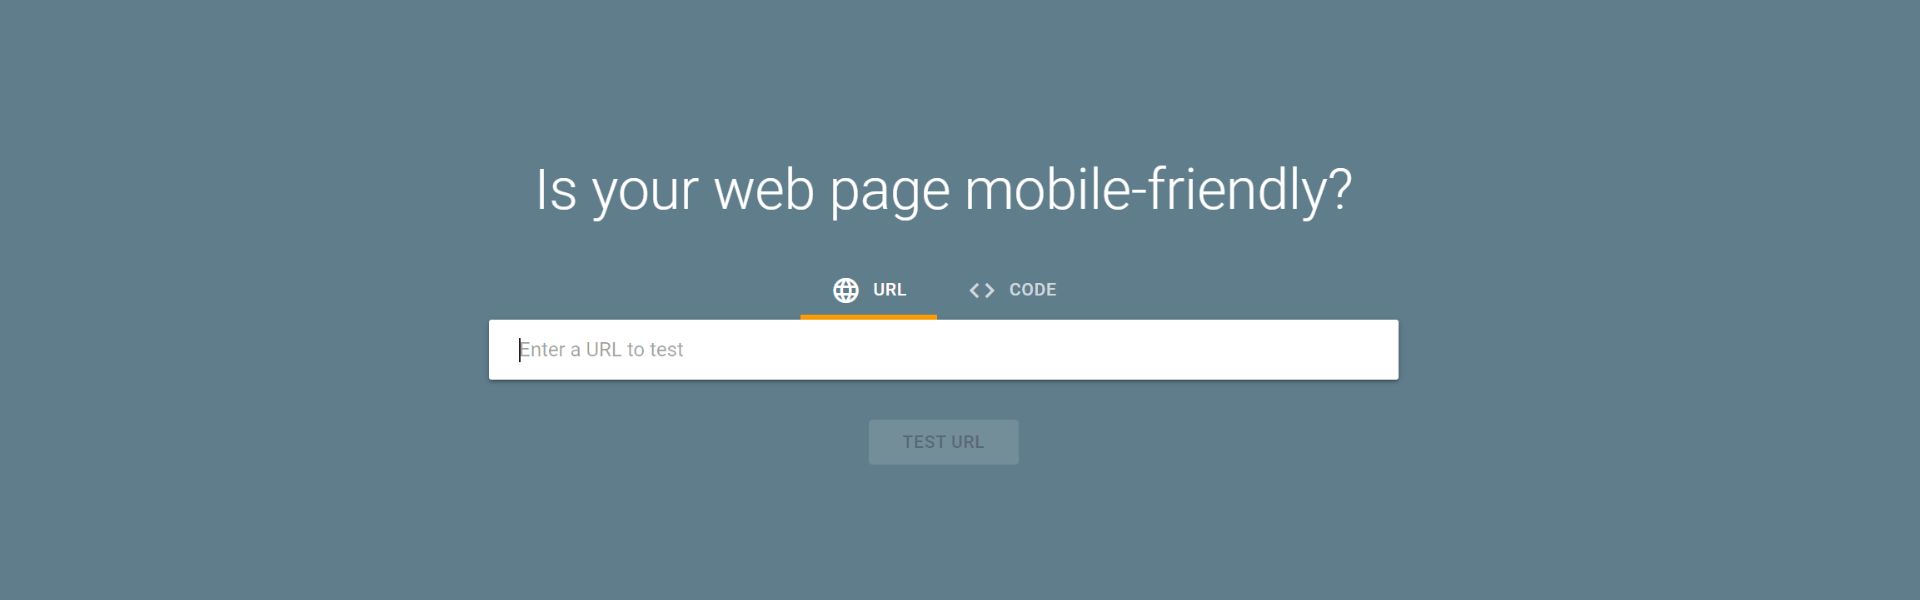 google’s mobile-friendly test tool